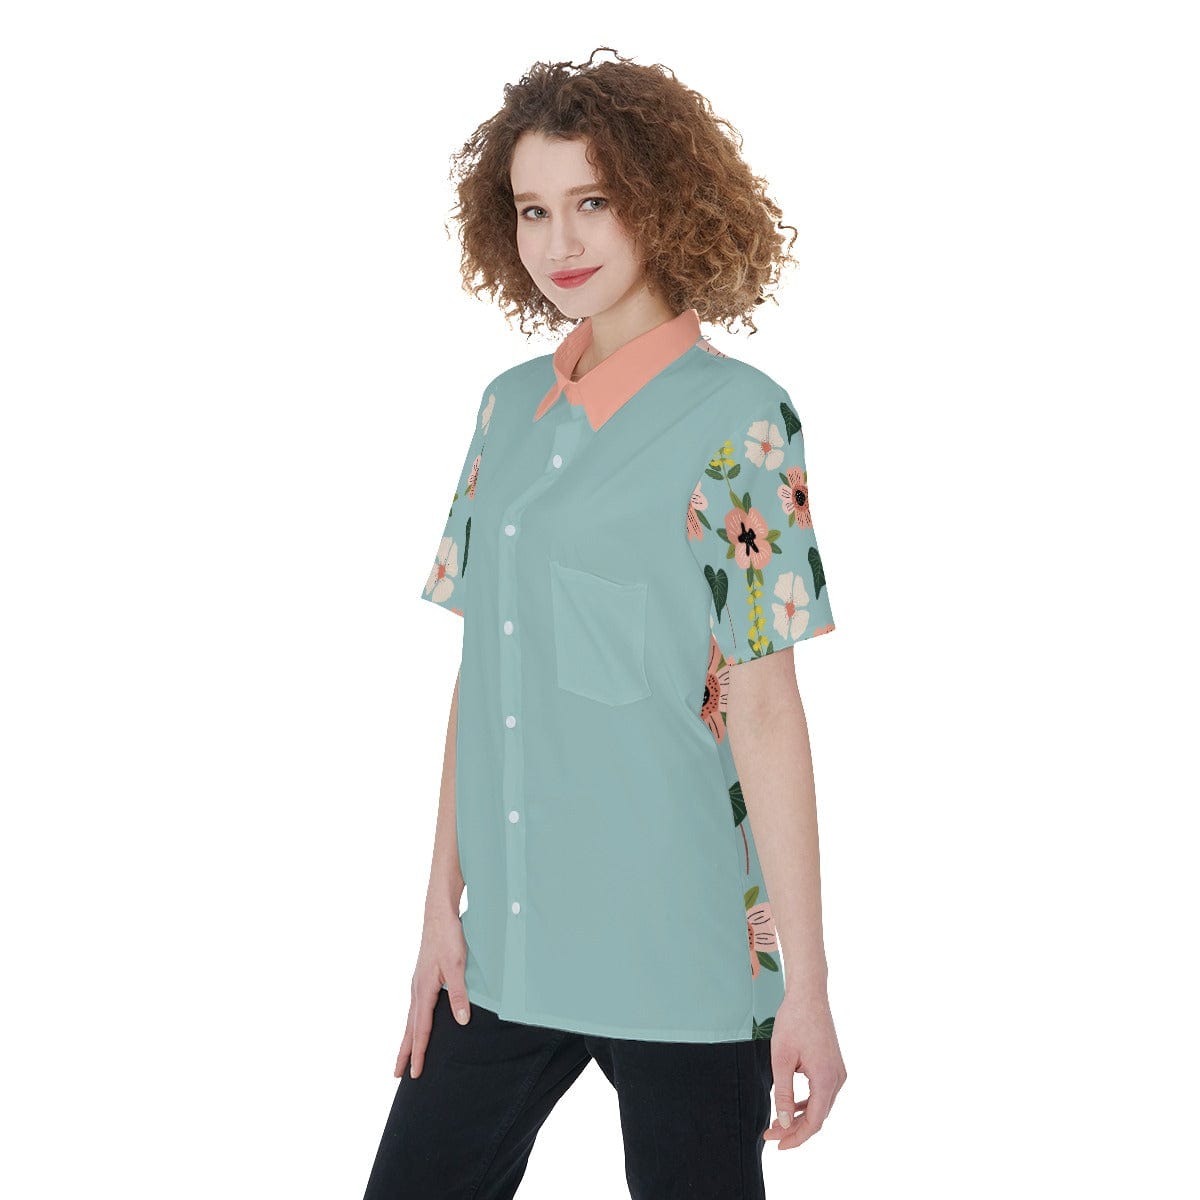 Yoycol Skirt Set Blue Green Coral Floral - Women's Short Sleeve Shirt With Pocket